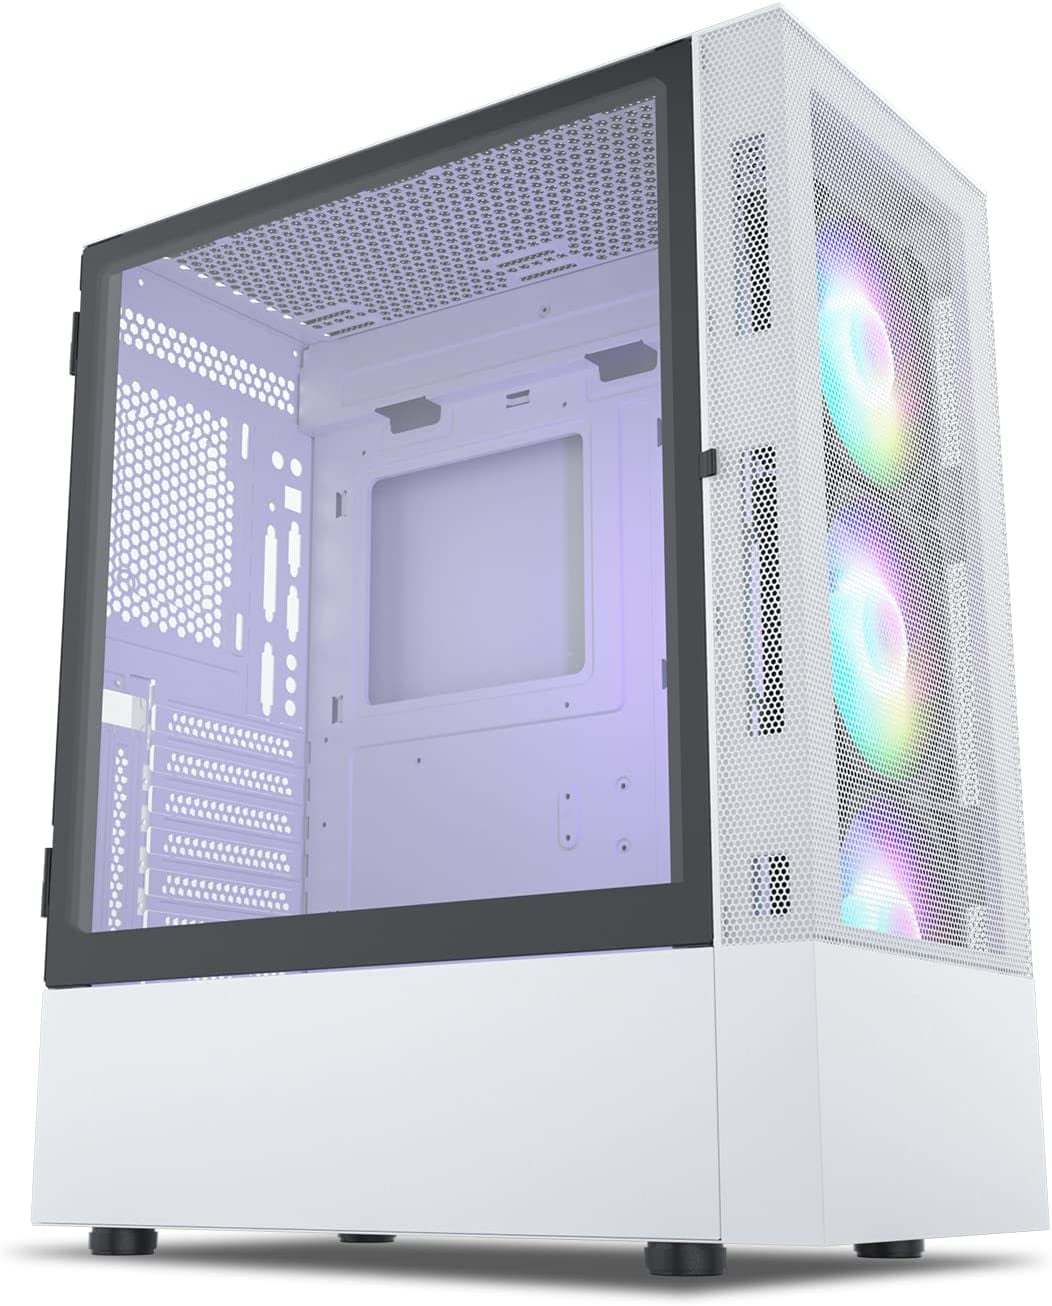 A03 White Mid-Tower ATX Gaming PC Case, Pre-Installed 3X ARGB&PWM Fans, Door Tempered Glass Panel, High Airflow Mesh Front Panel Case Come with Controller Hub - Walmart.com